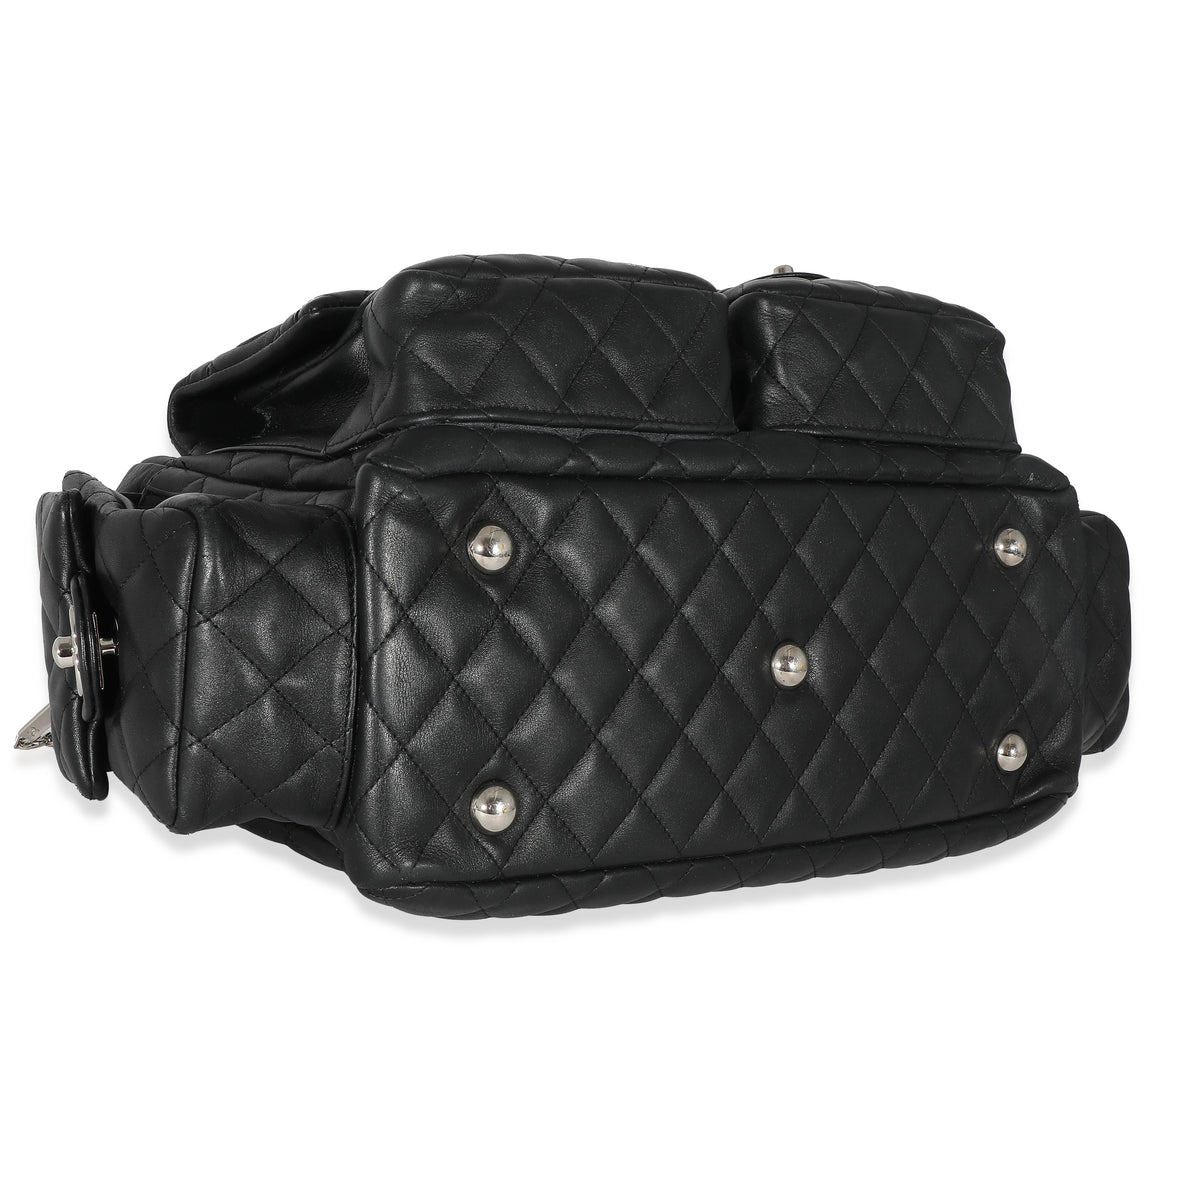 SOLD（已售出）Chanel Cambon Multipocket Reporter Bag(Black is